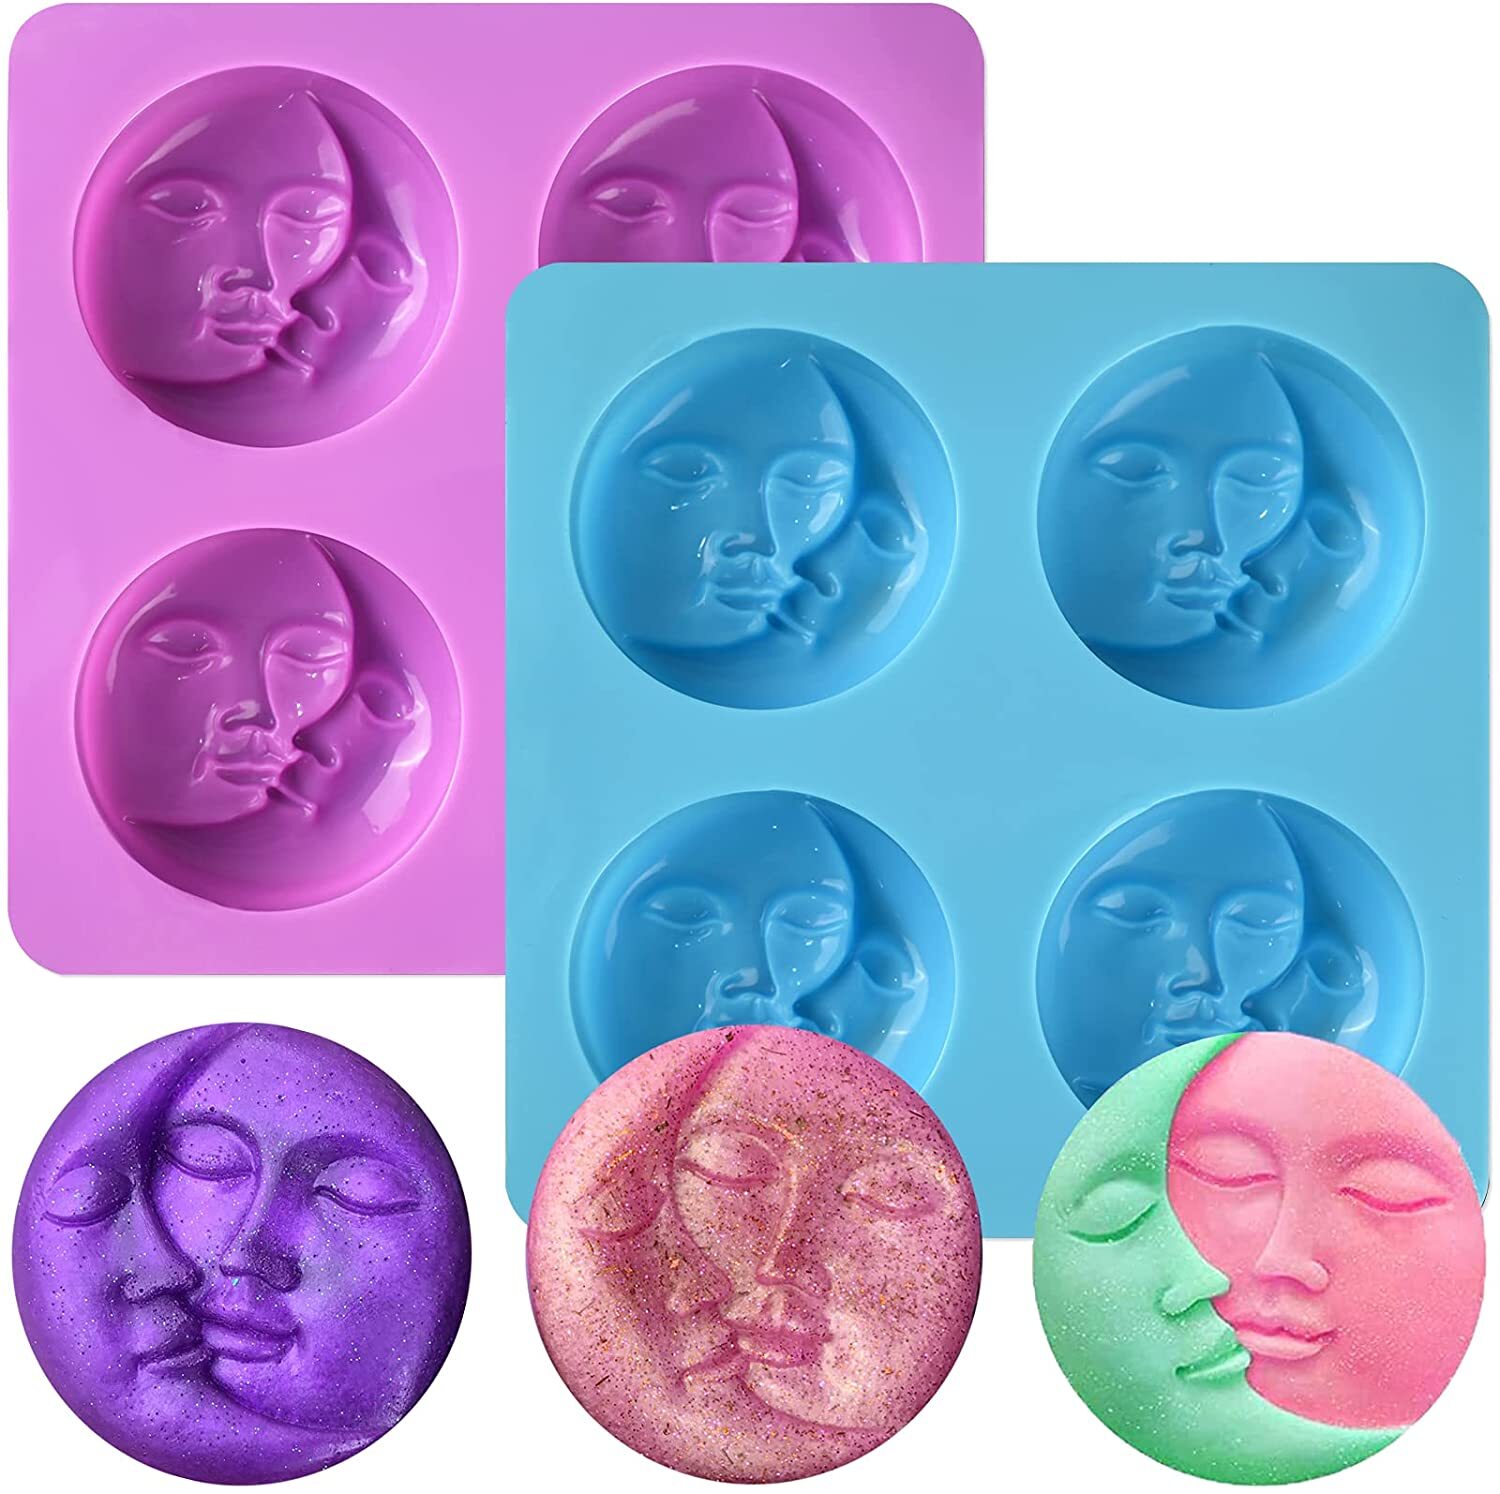 Flower Soap Molds for Soap Making, Resin Candle Mold Silicone, Bath Bombs  Lotion Bar Silicone Mold, 3D Mold for Soap Candle 